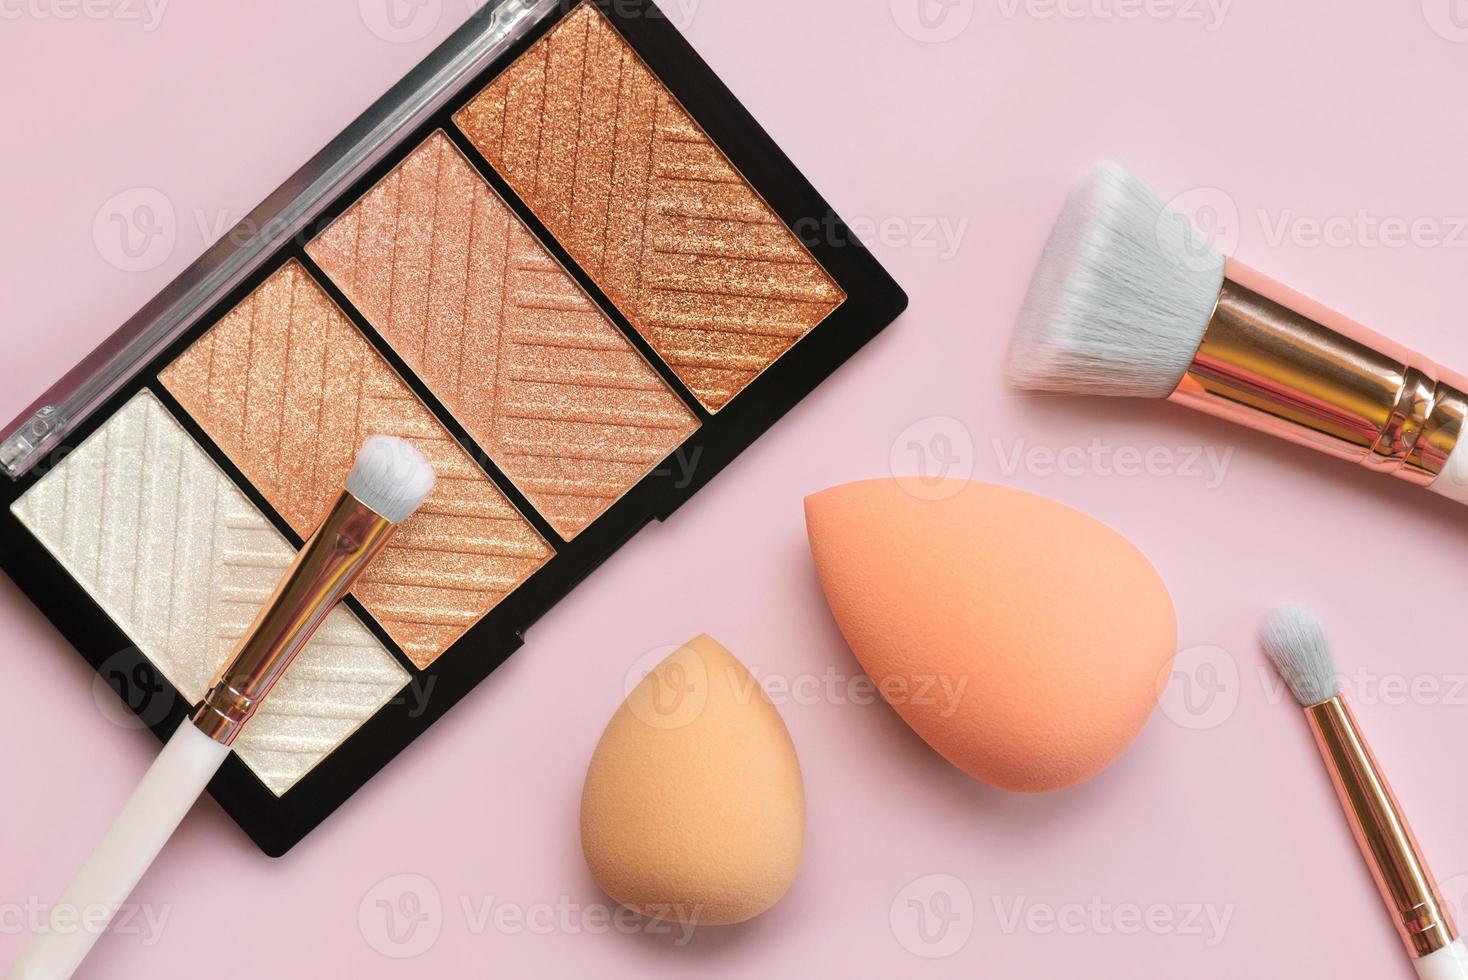 Top view of highlighter palette, makeup sponges and makeup brushes. Beauty and makeup concept photo